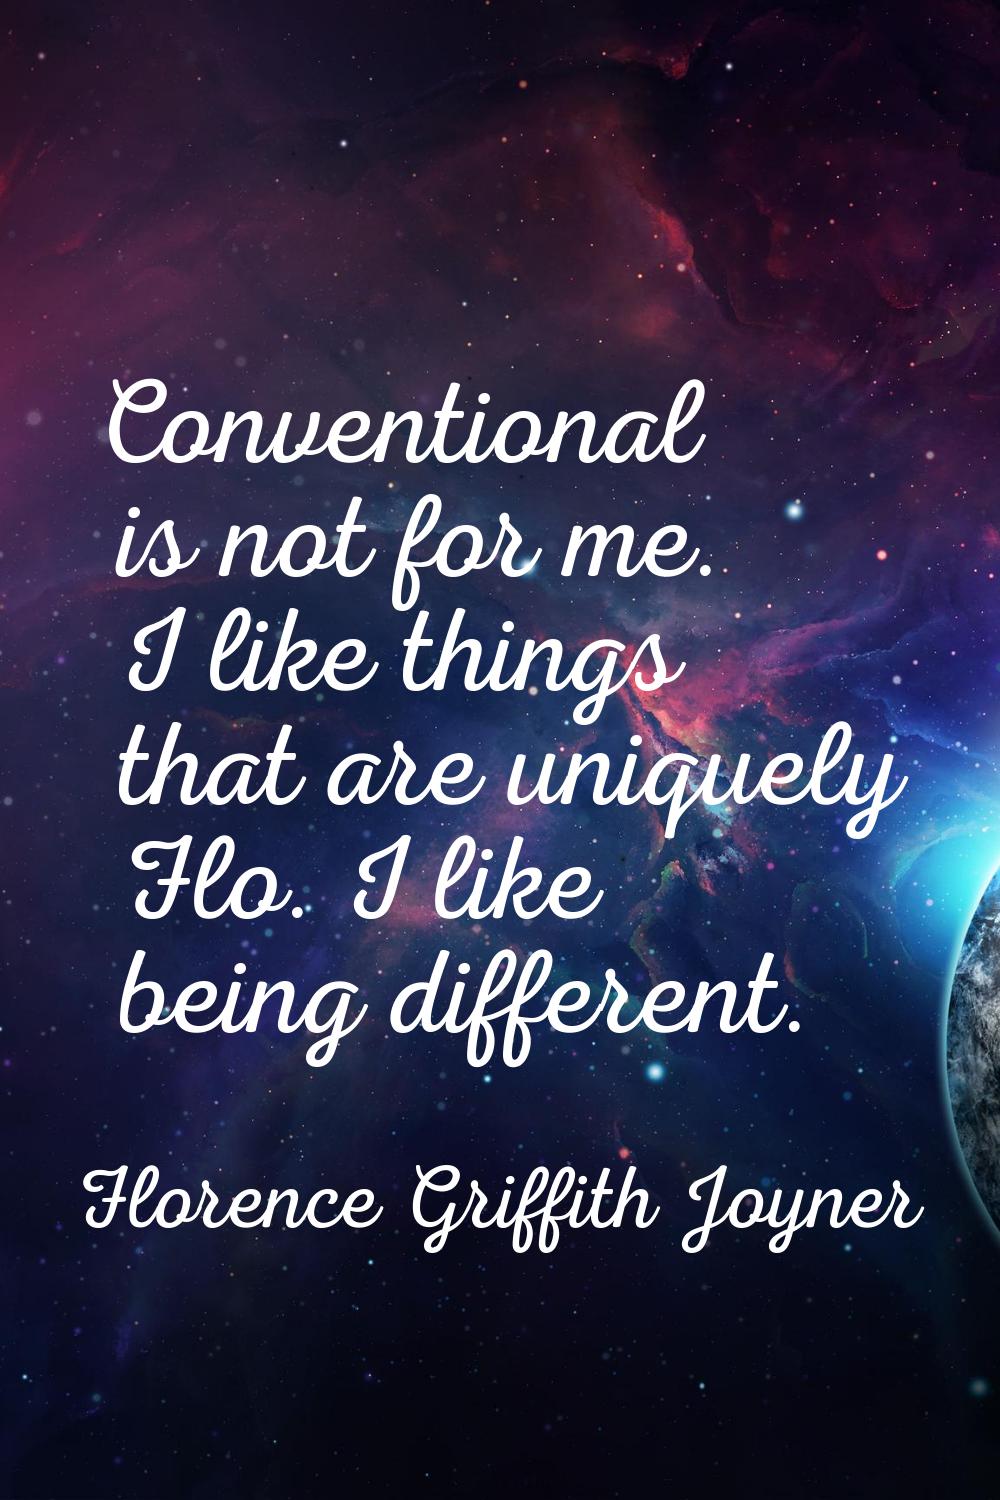 Conventional is not for me. I like things that are uniquely Flo. I like being different.